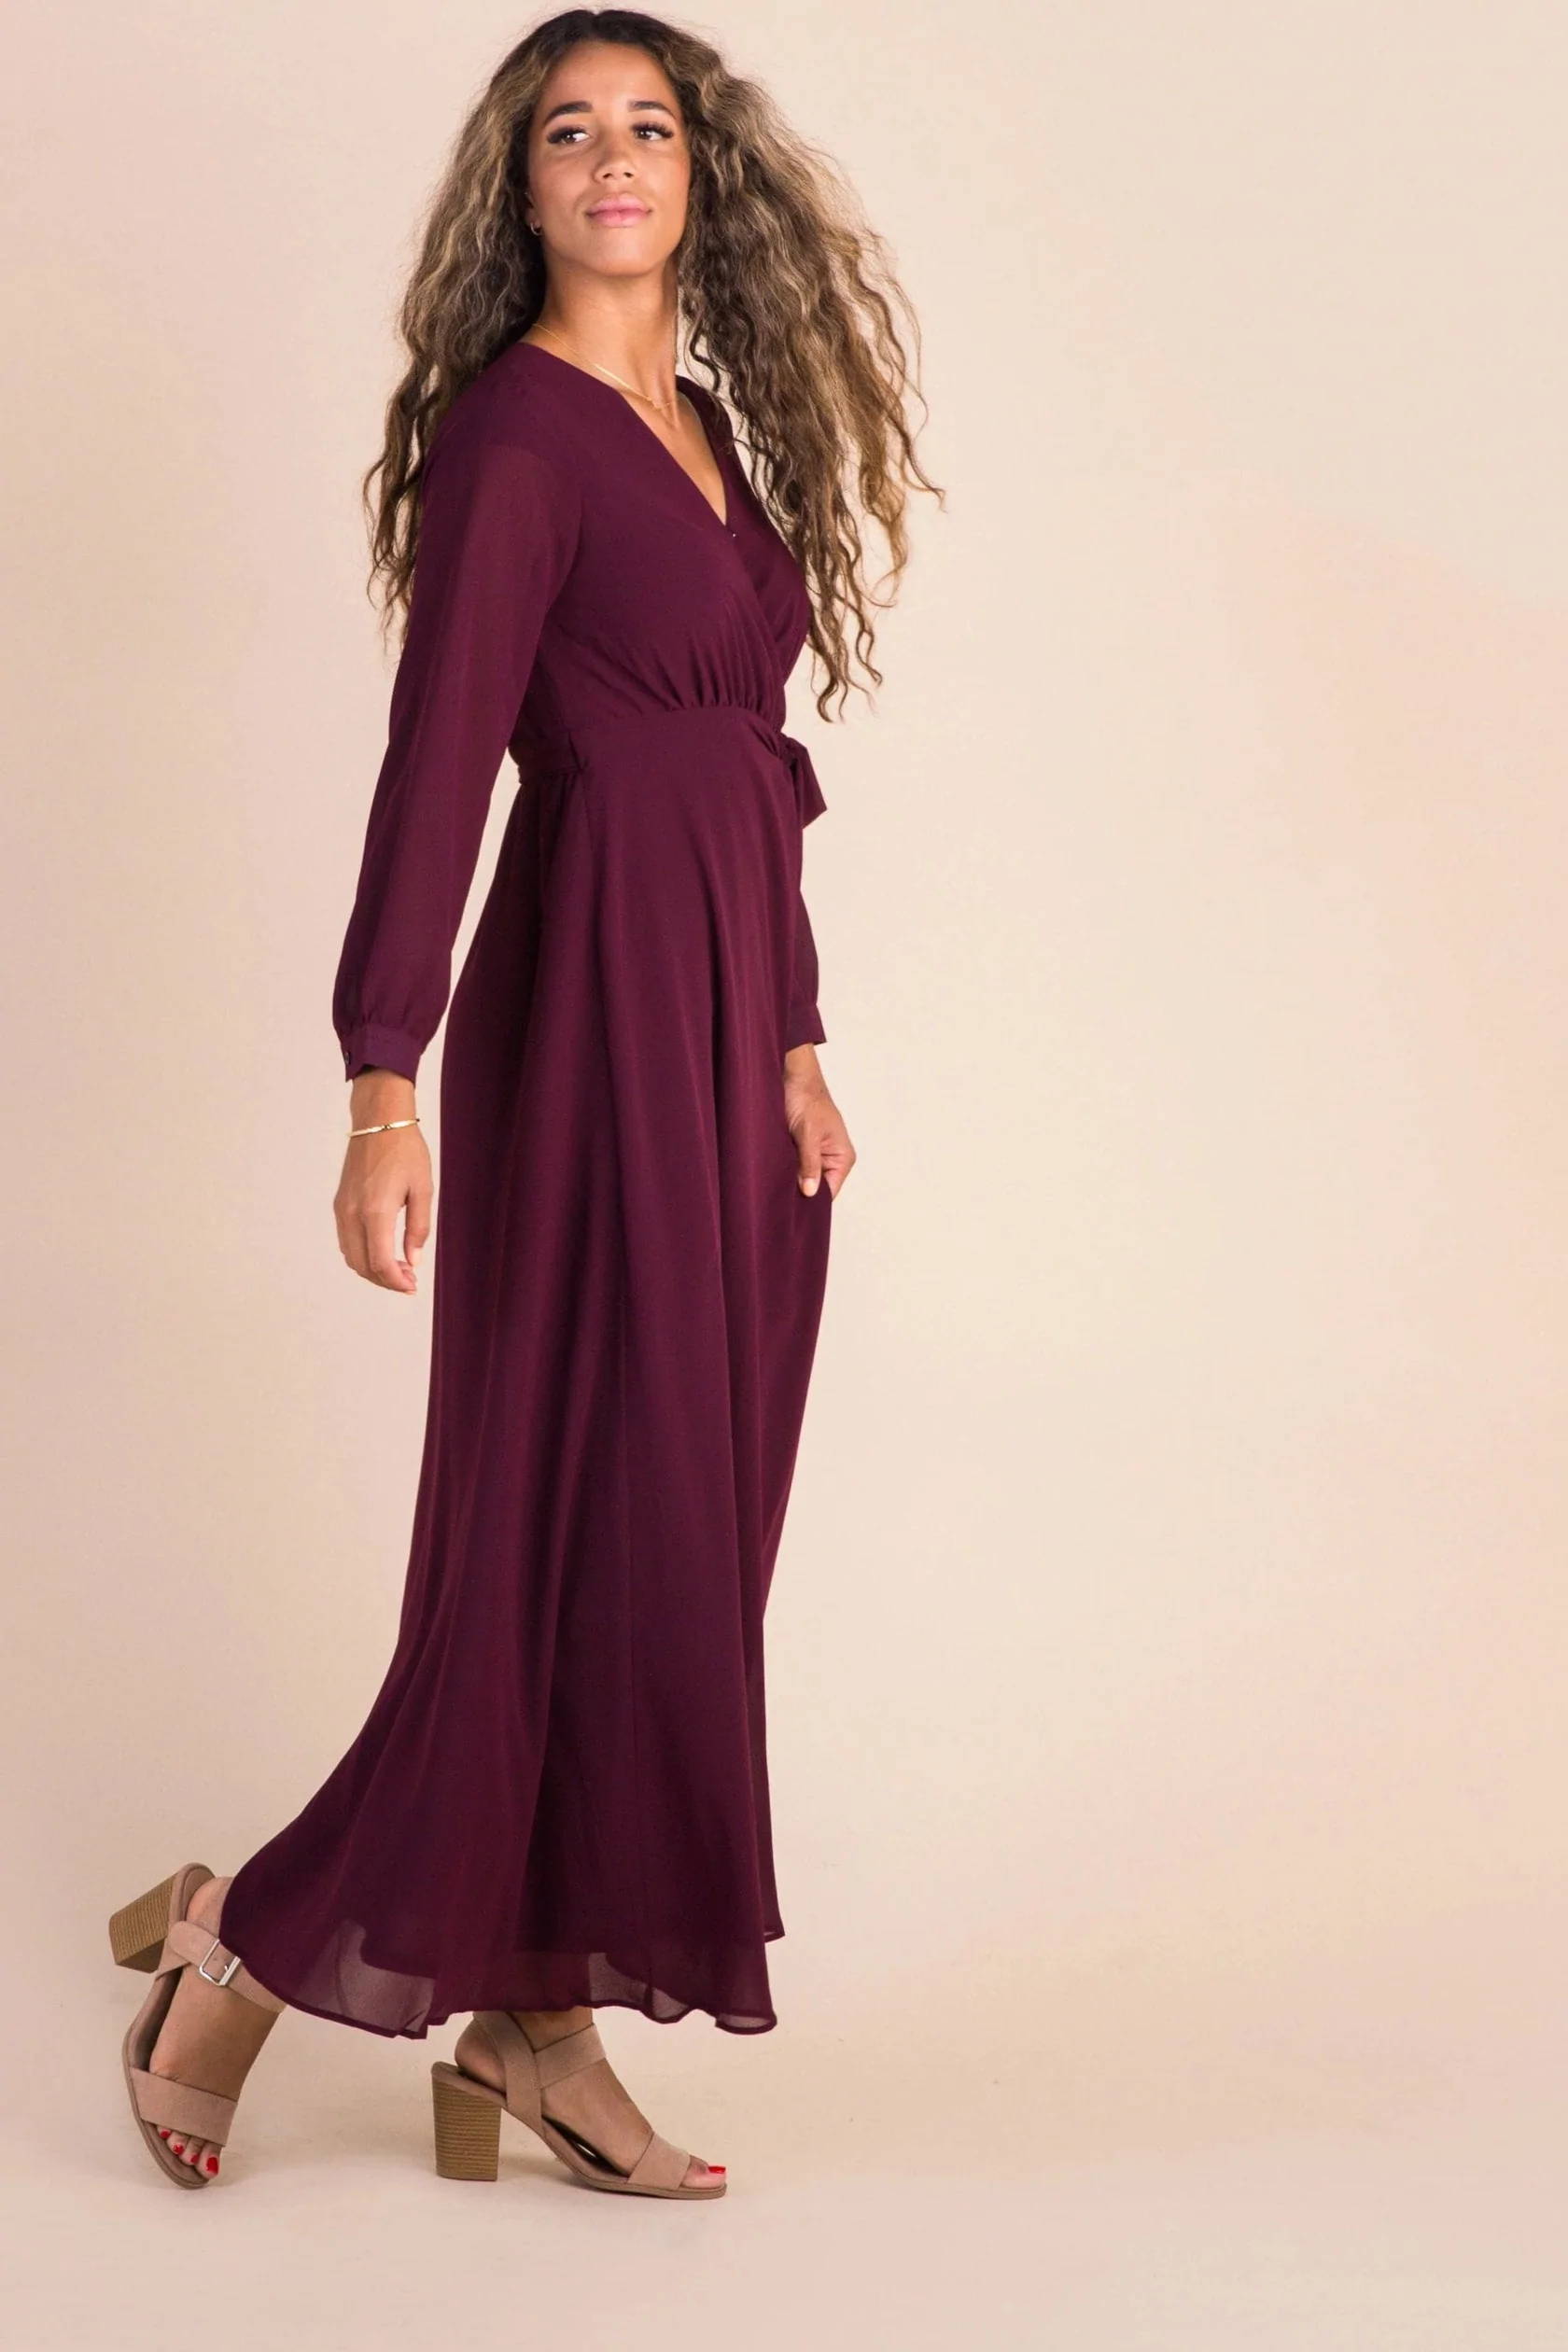  A woman poses in a dark red floor-length fall dress